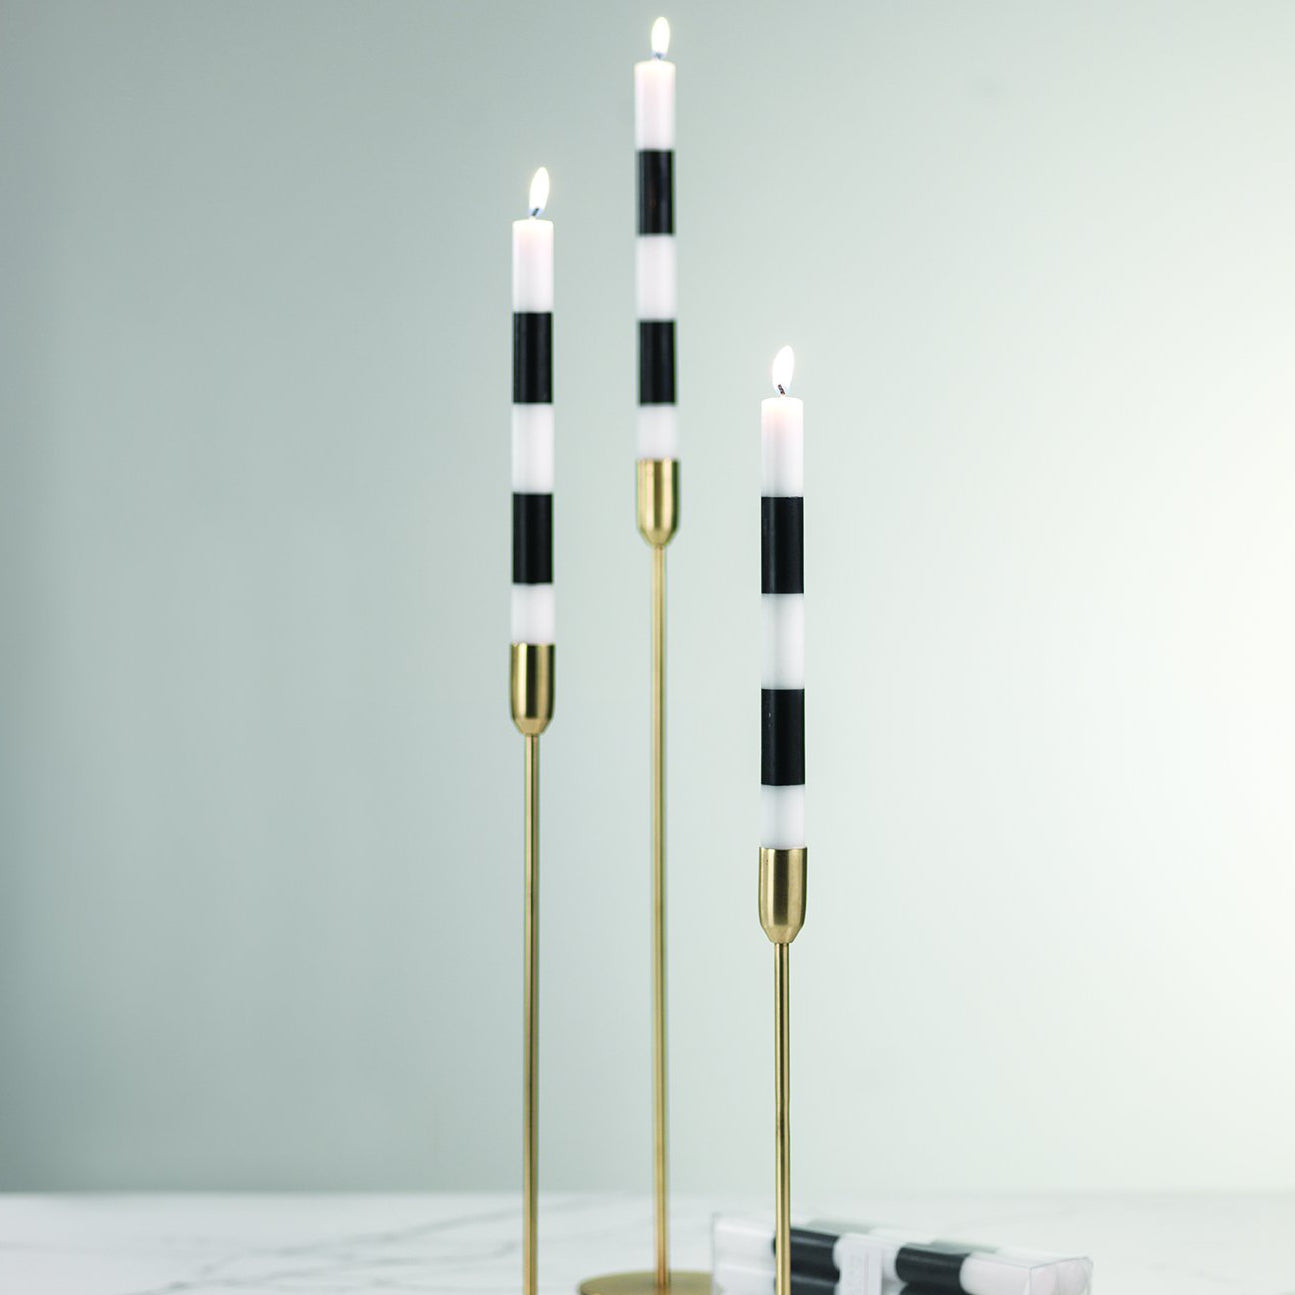 Modern & Festive Black Formal Taper Candles - Box of 6 - CARLYLE AVENUE